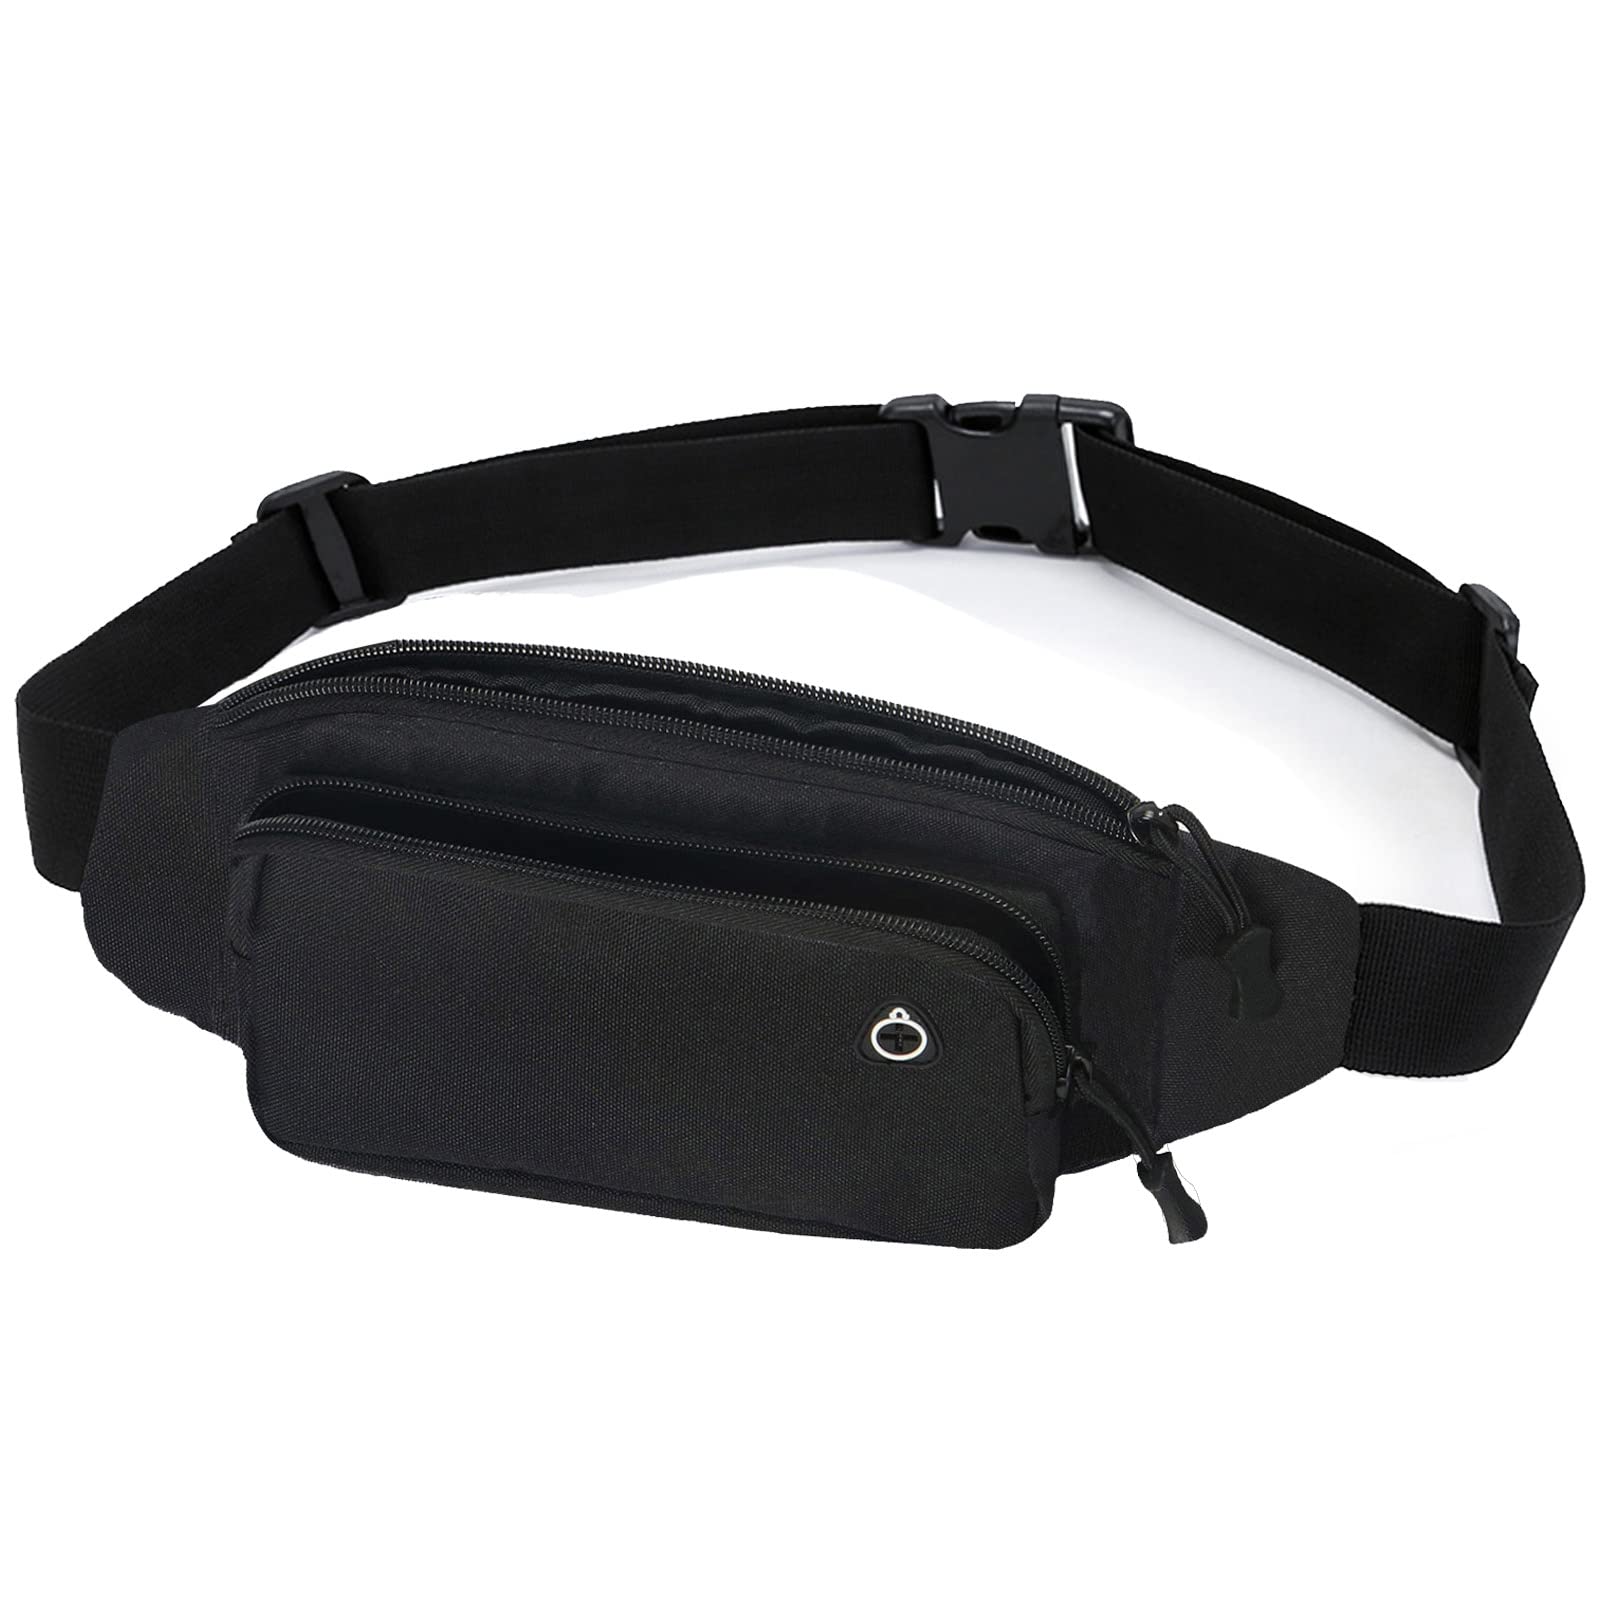 FASHION RACING ® Gift for Men Leather Bum Bag Fanny Pack - Etsy